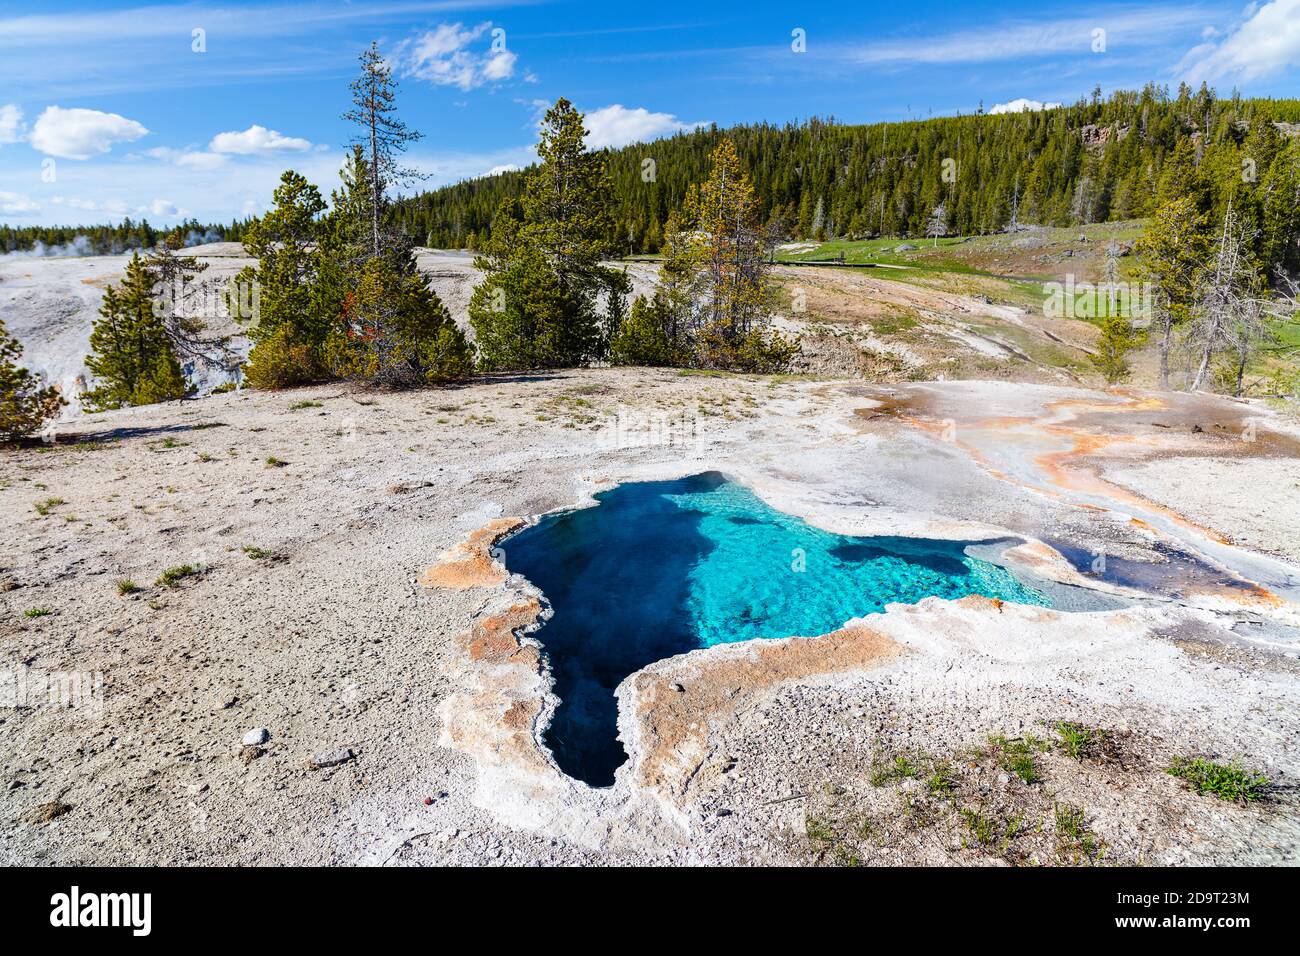 West Thumb Geyser Basin dans le parc national de Yellowstone, Wyoming Banque D'Images